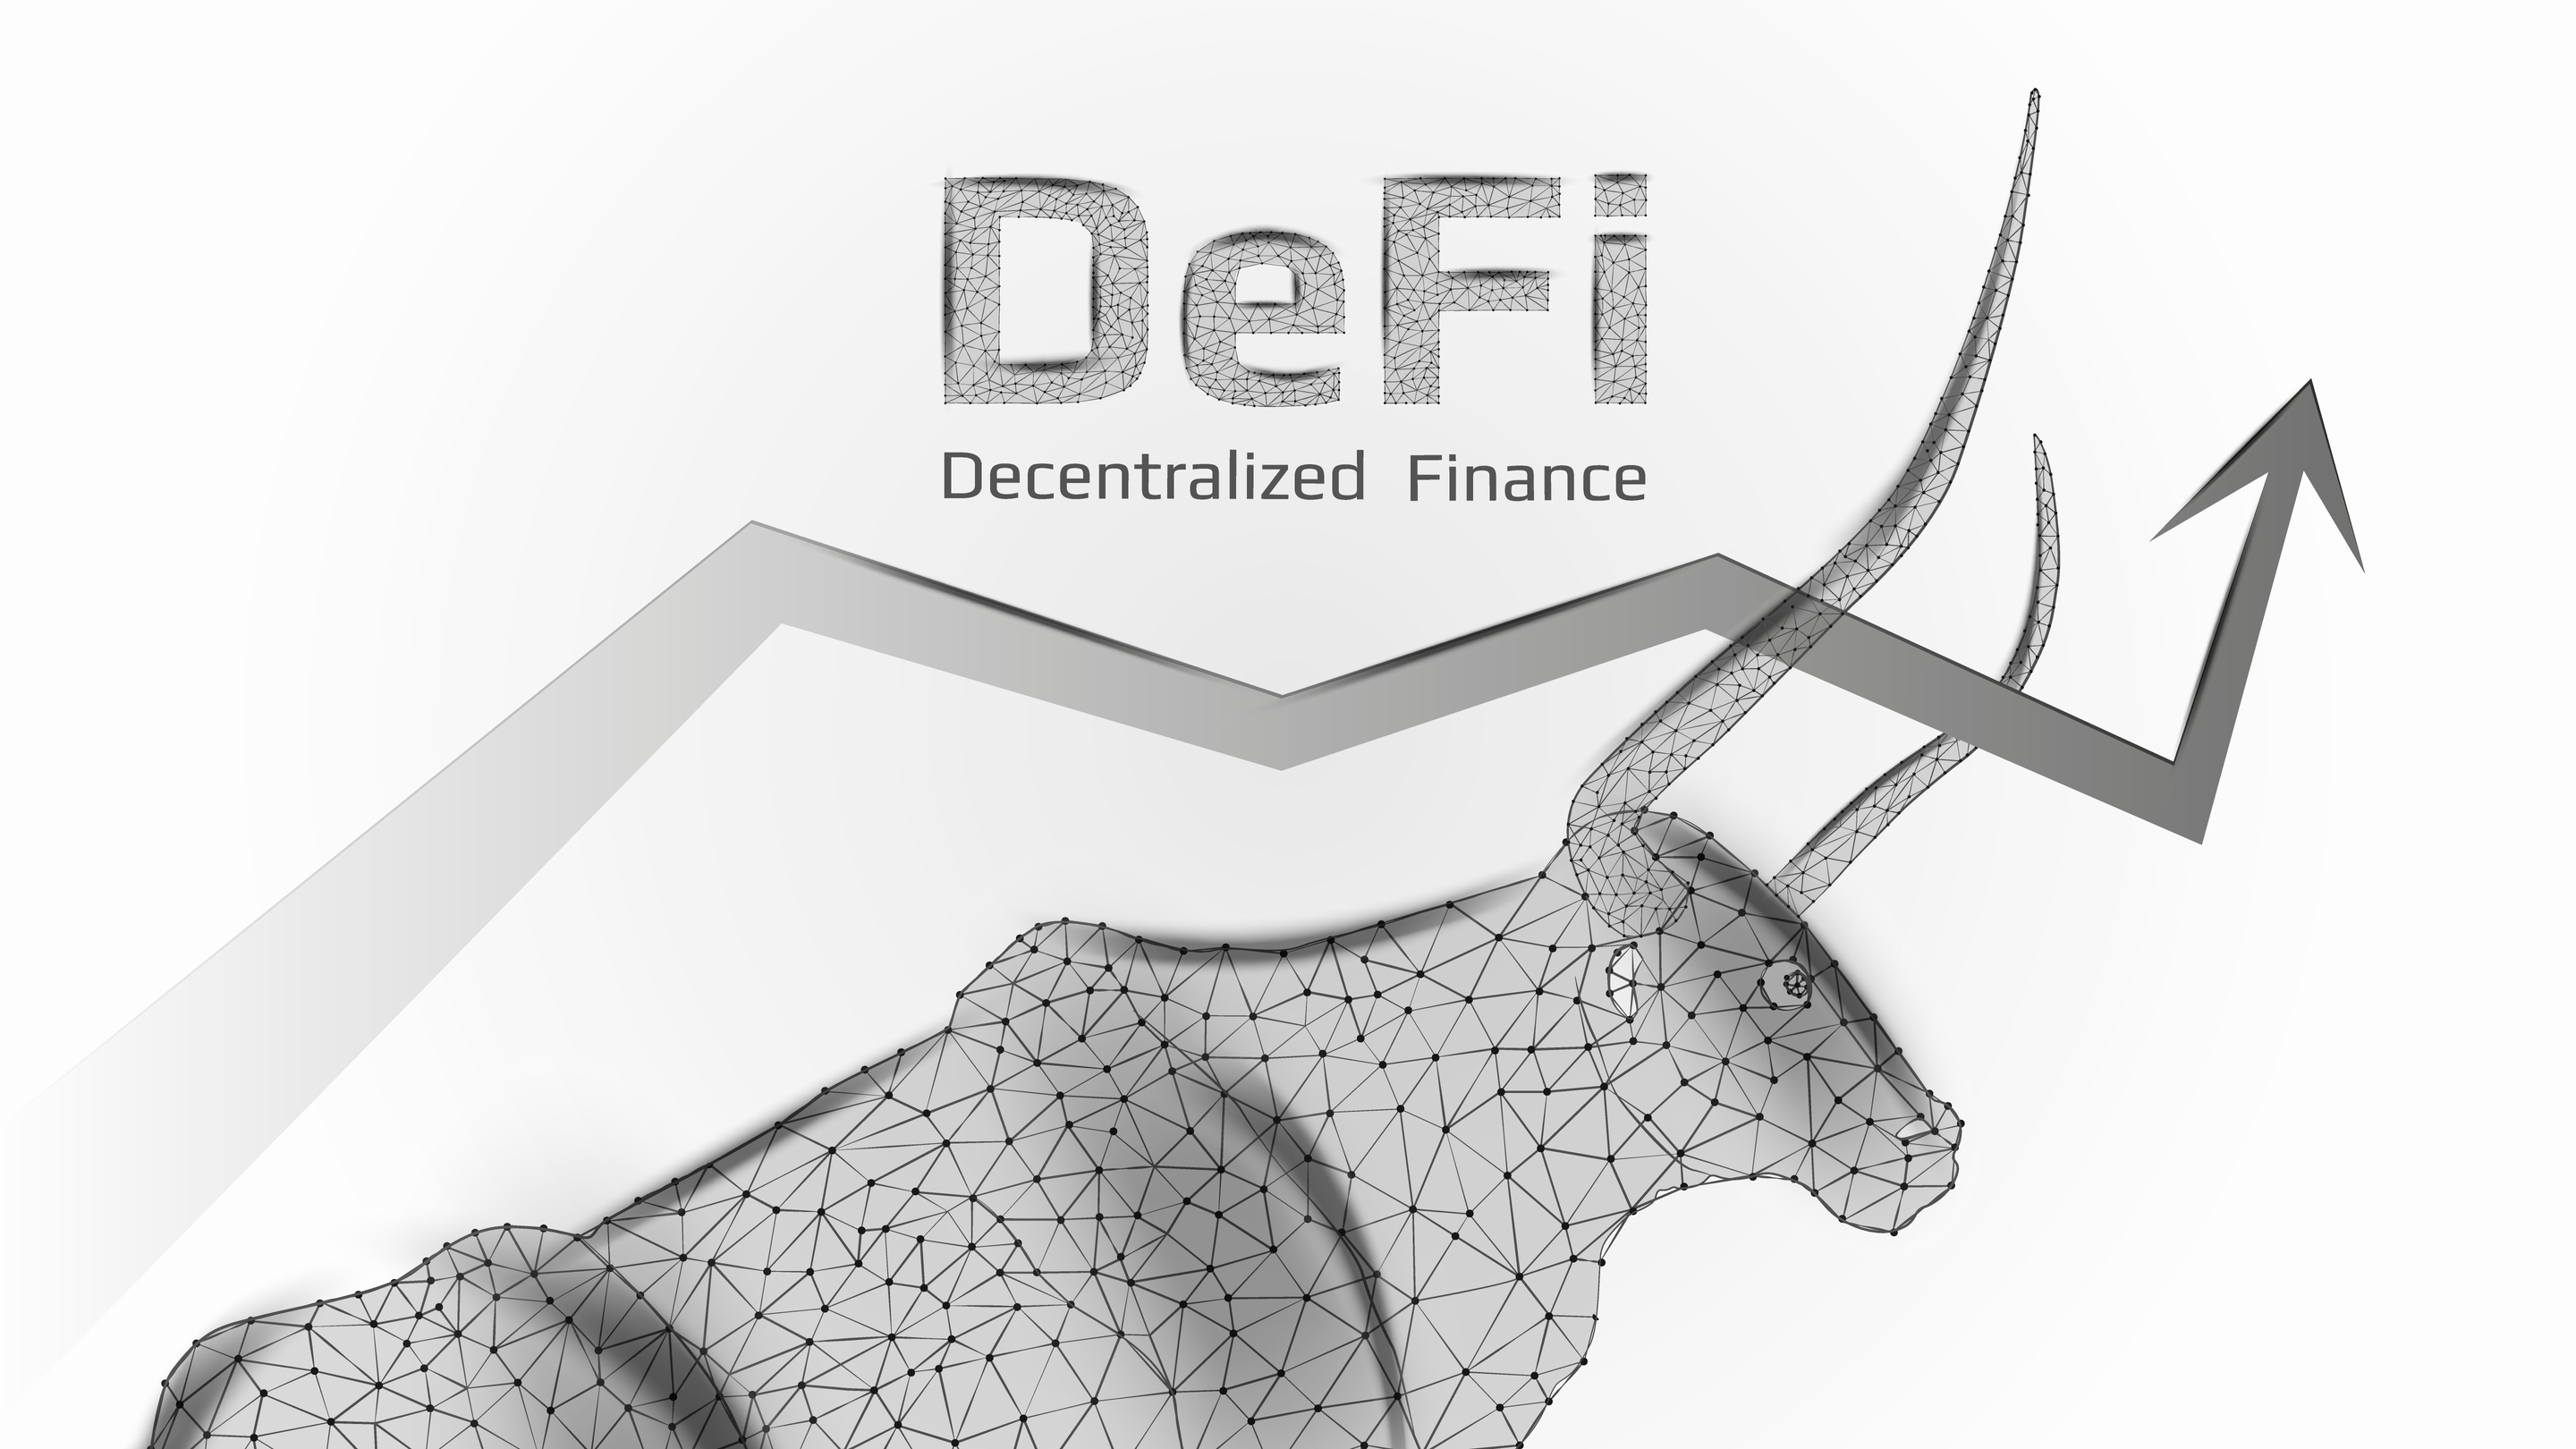 How Large Is the DeFi Market